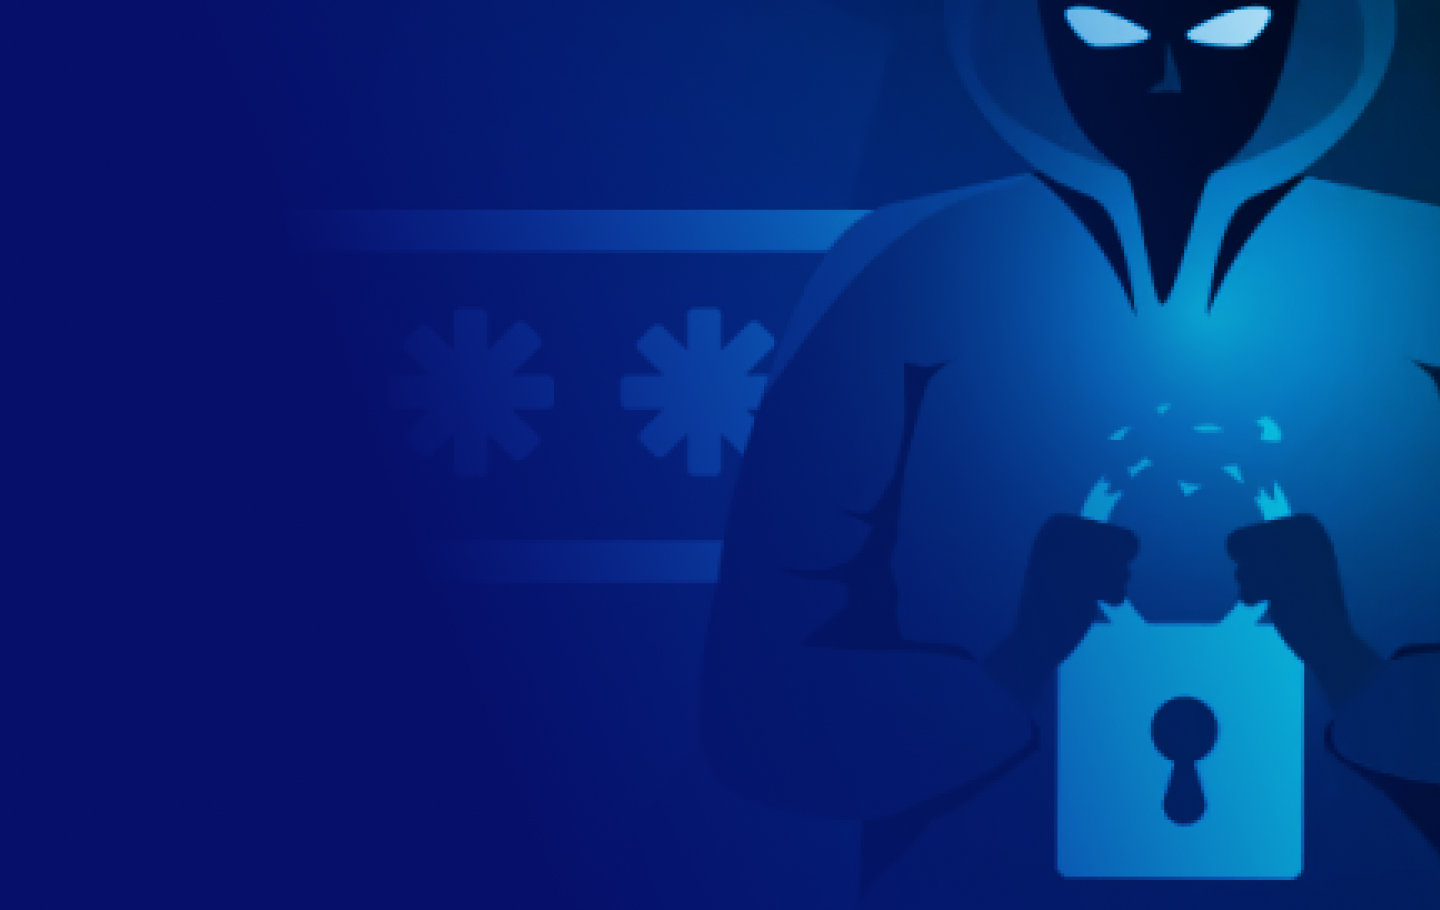 Blue cover, a person's image on the right side holding a lock